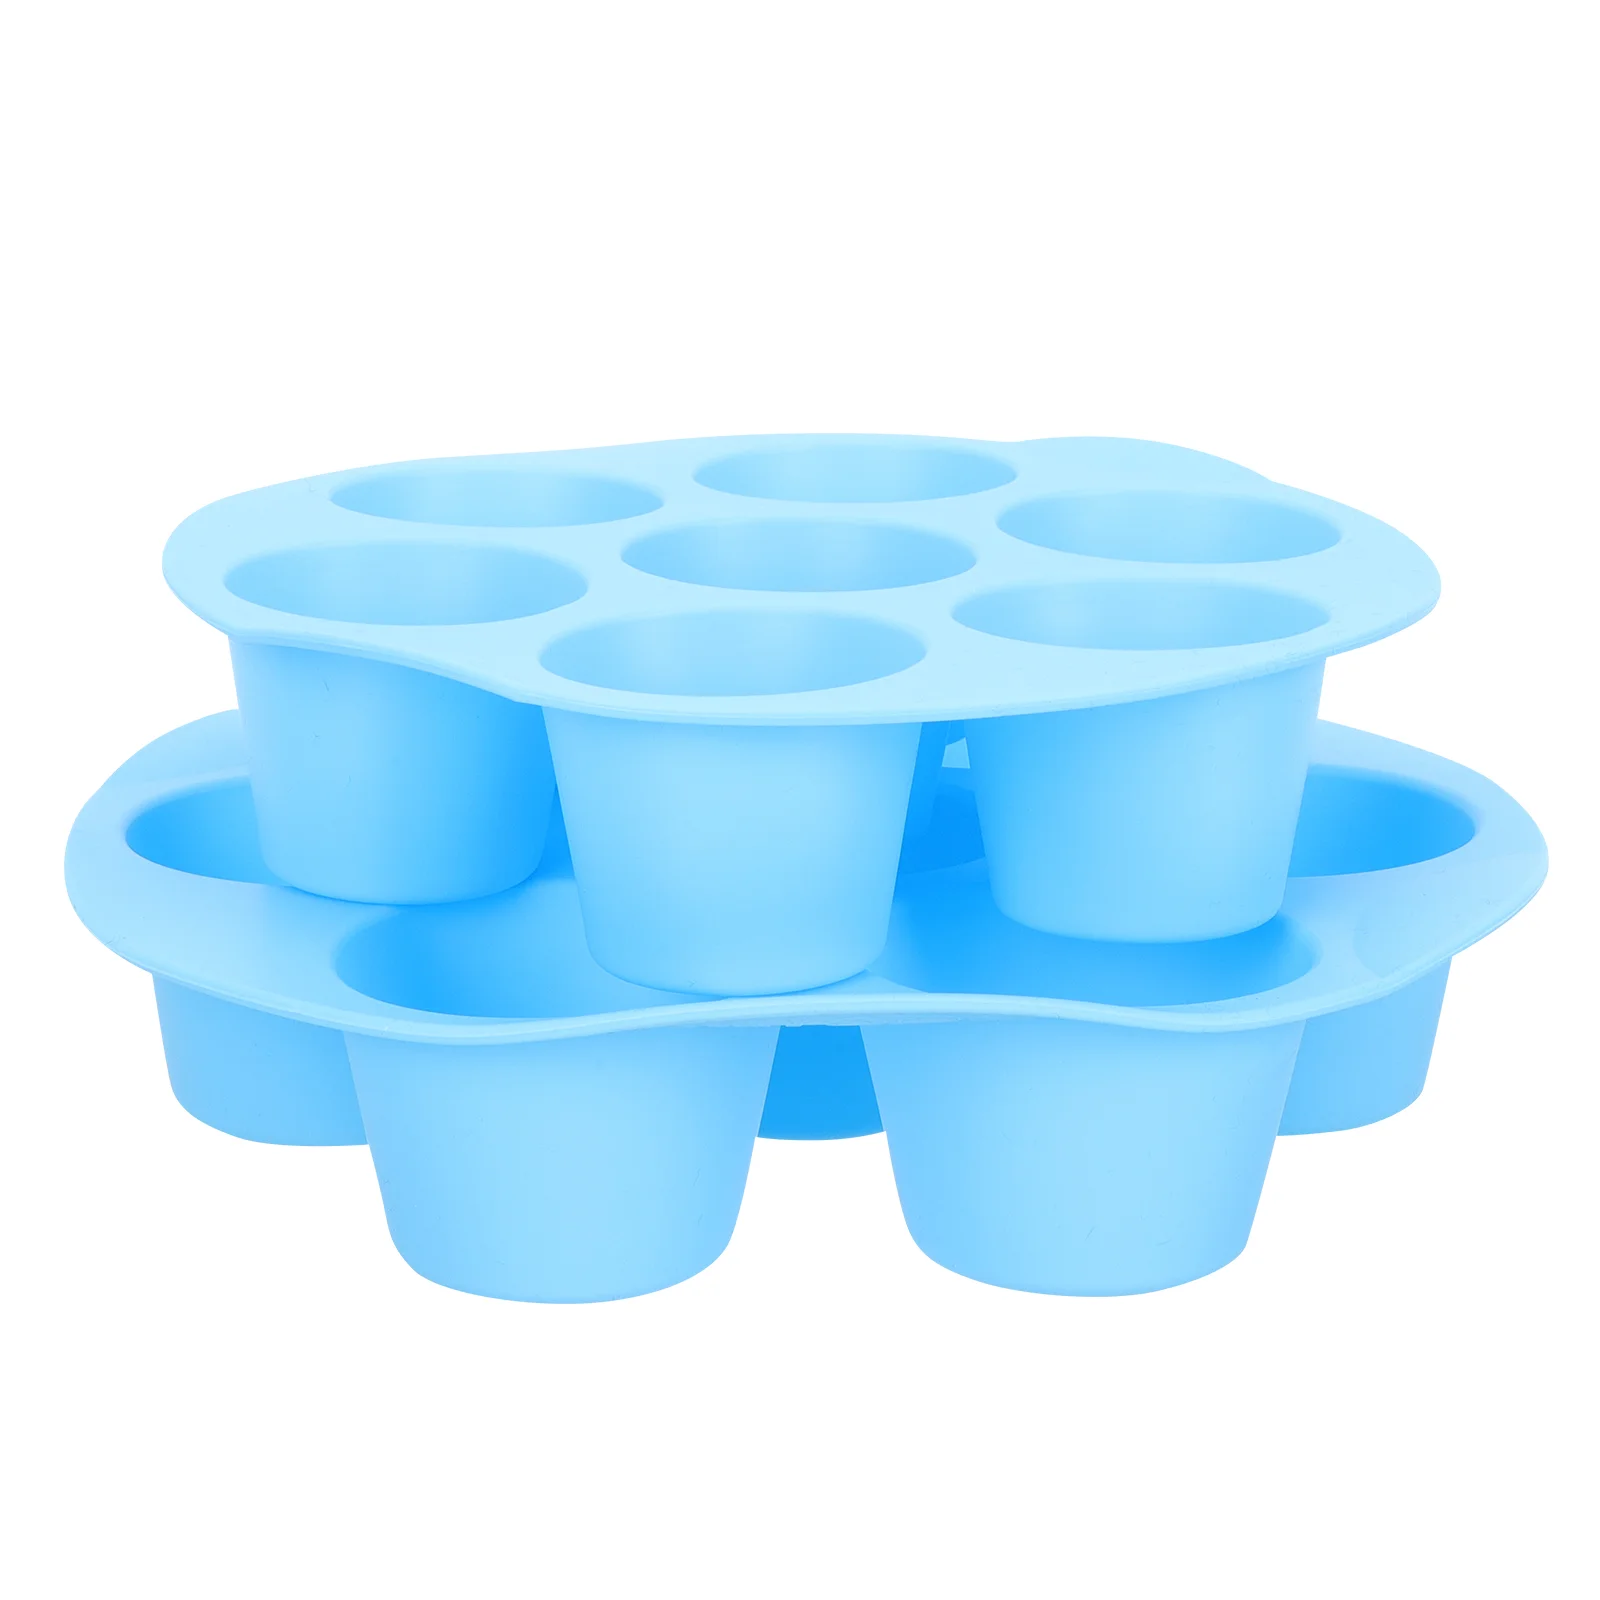 

Silicone Pan Molds Mold Muffin Baking Cupcake Chocolate Cups Mini Cookie Air Fryer Brownie Pastry Cake Tin Hot Molder Dessert